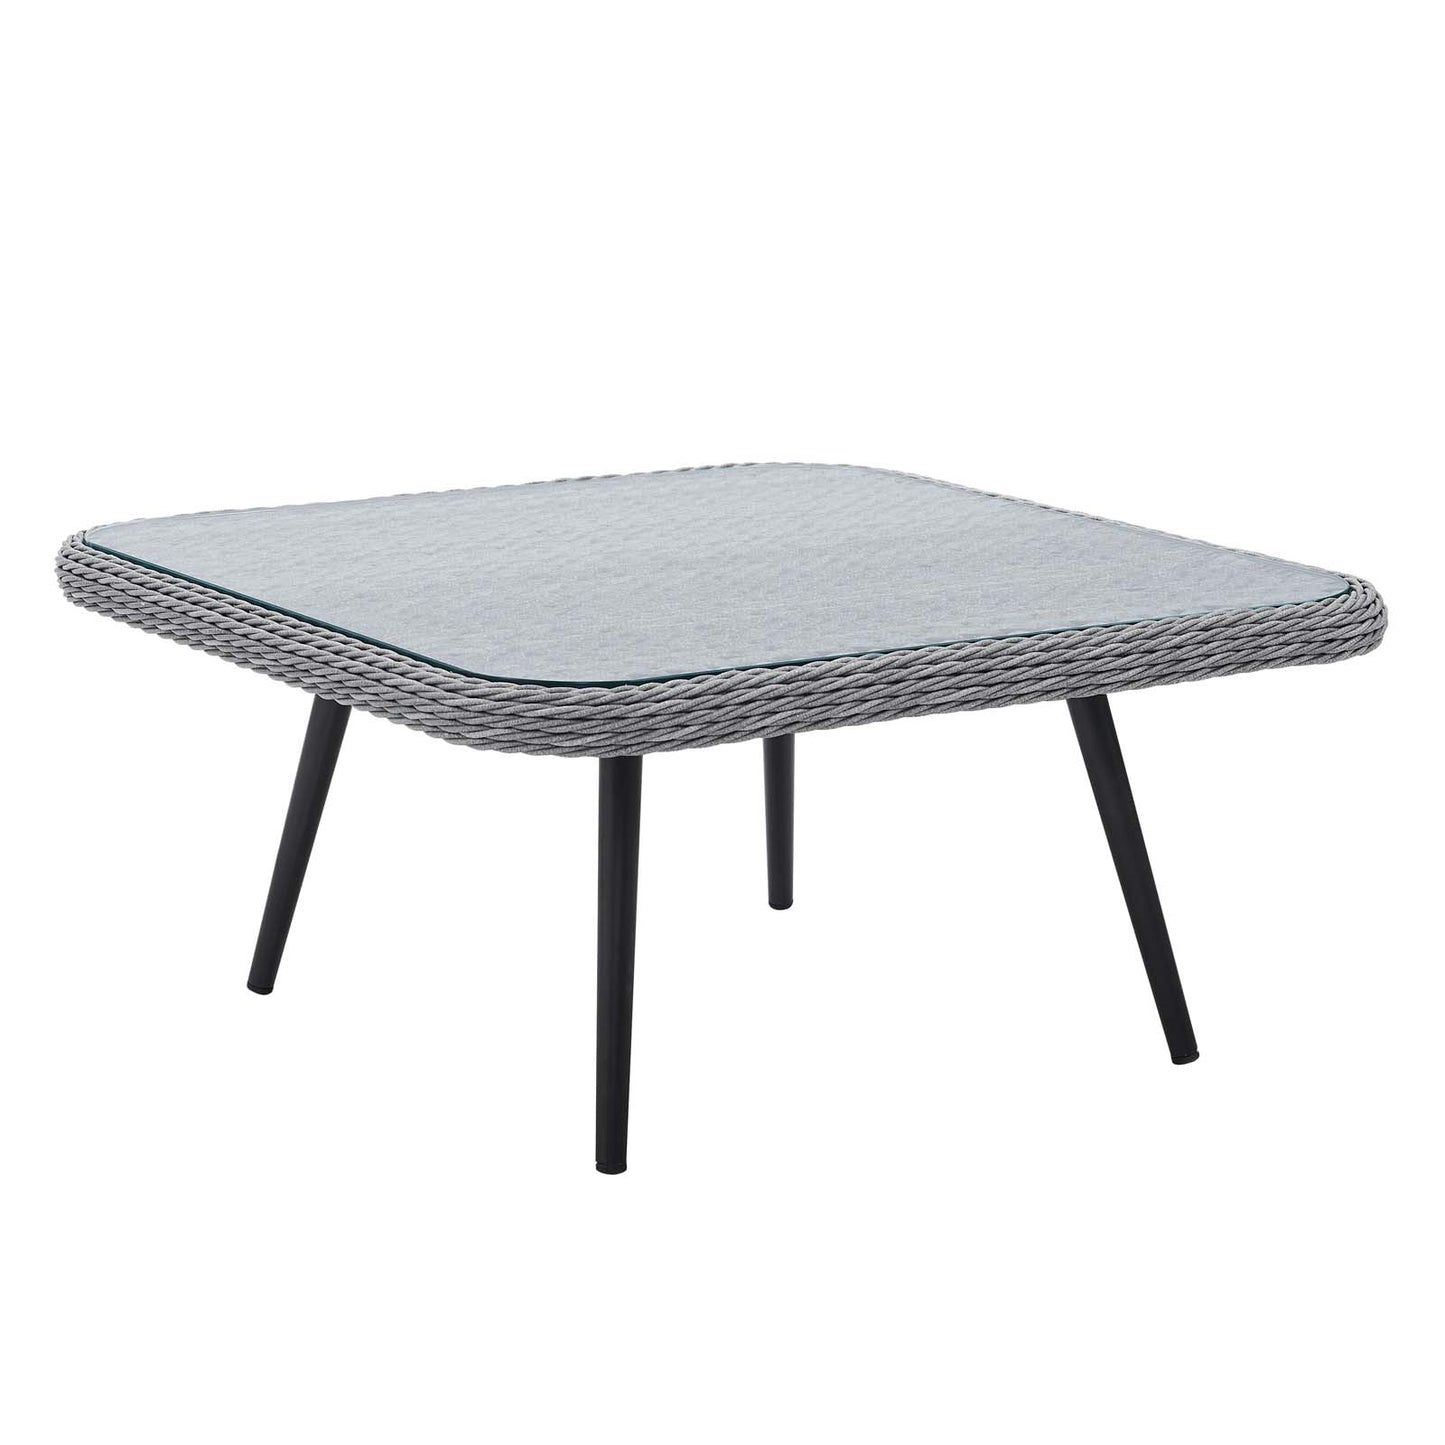 Endeavor Outdoor Patio Wicker Rattan Square Coffee Table Gray EEI-4659-GRY